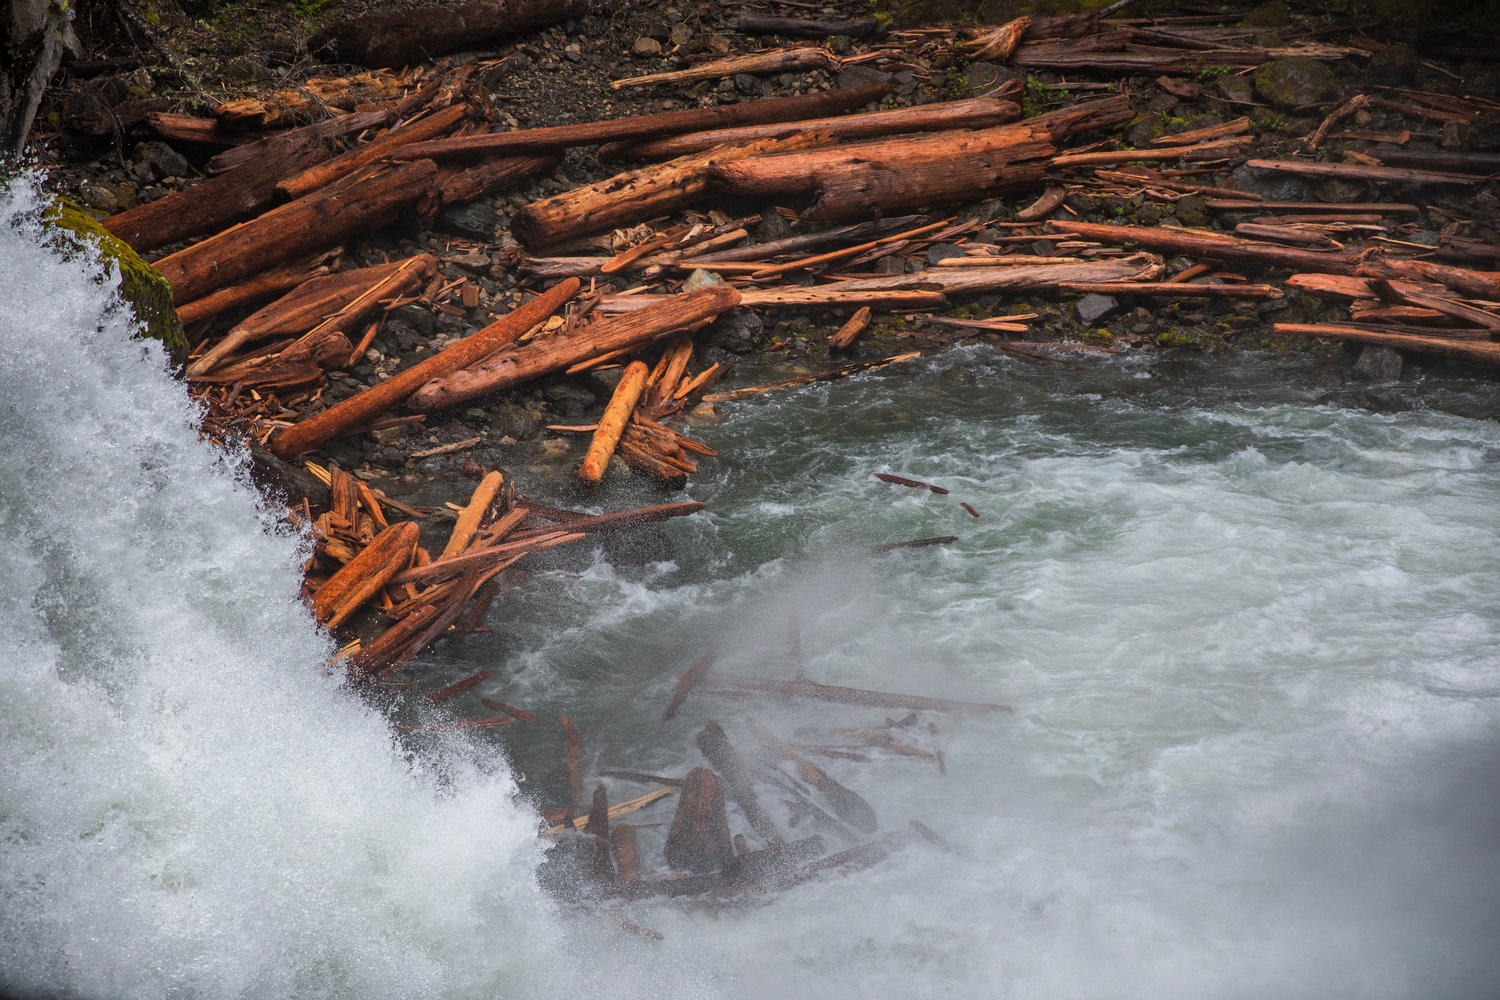 Logs pile up at the bottom of Silver Falls near the Ohanapecosh Campground on Sunday in Mount Rainier National Park.